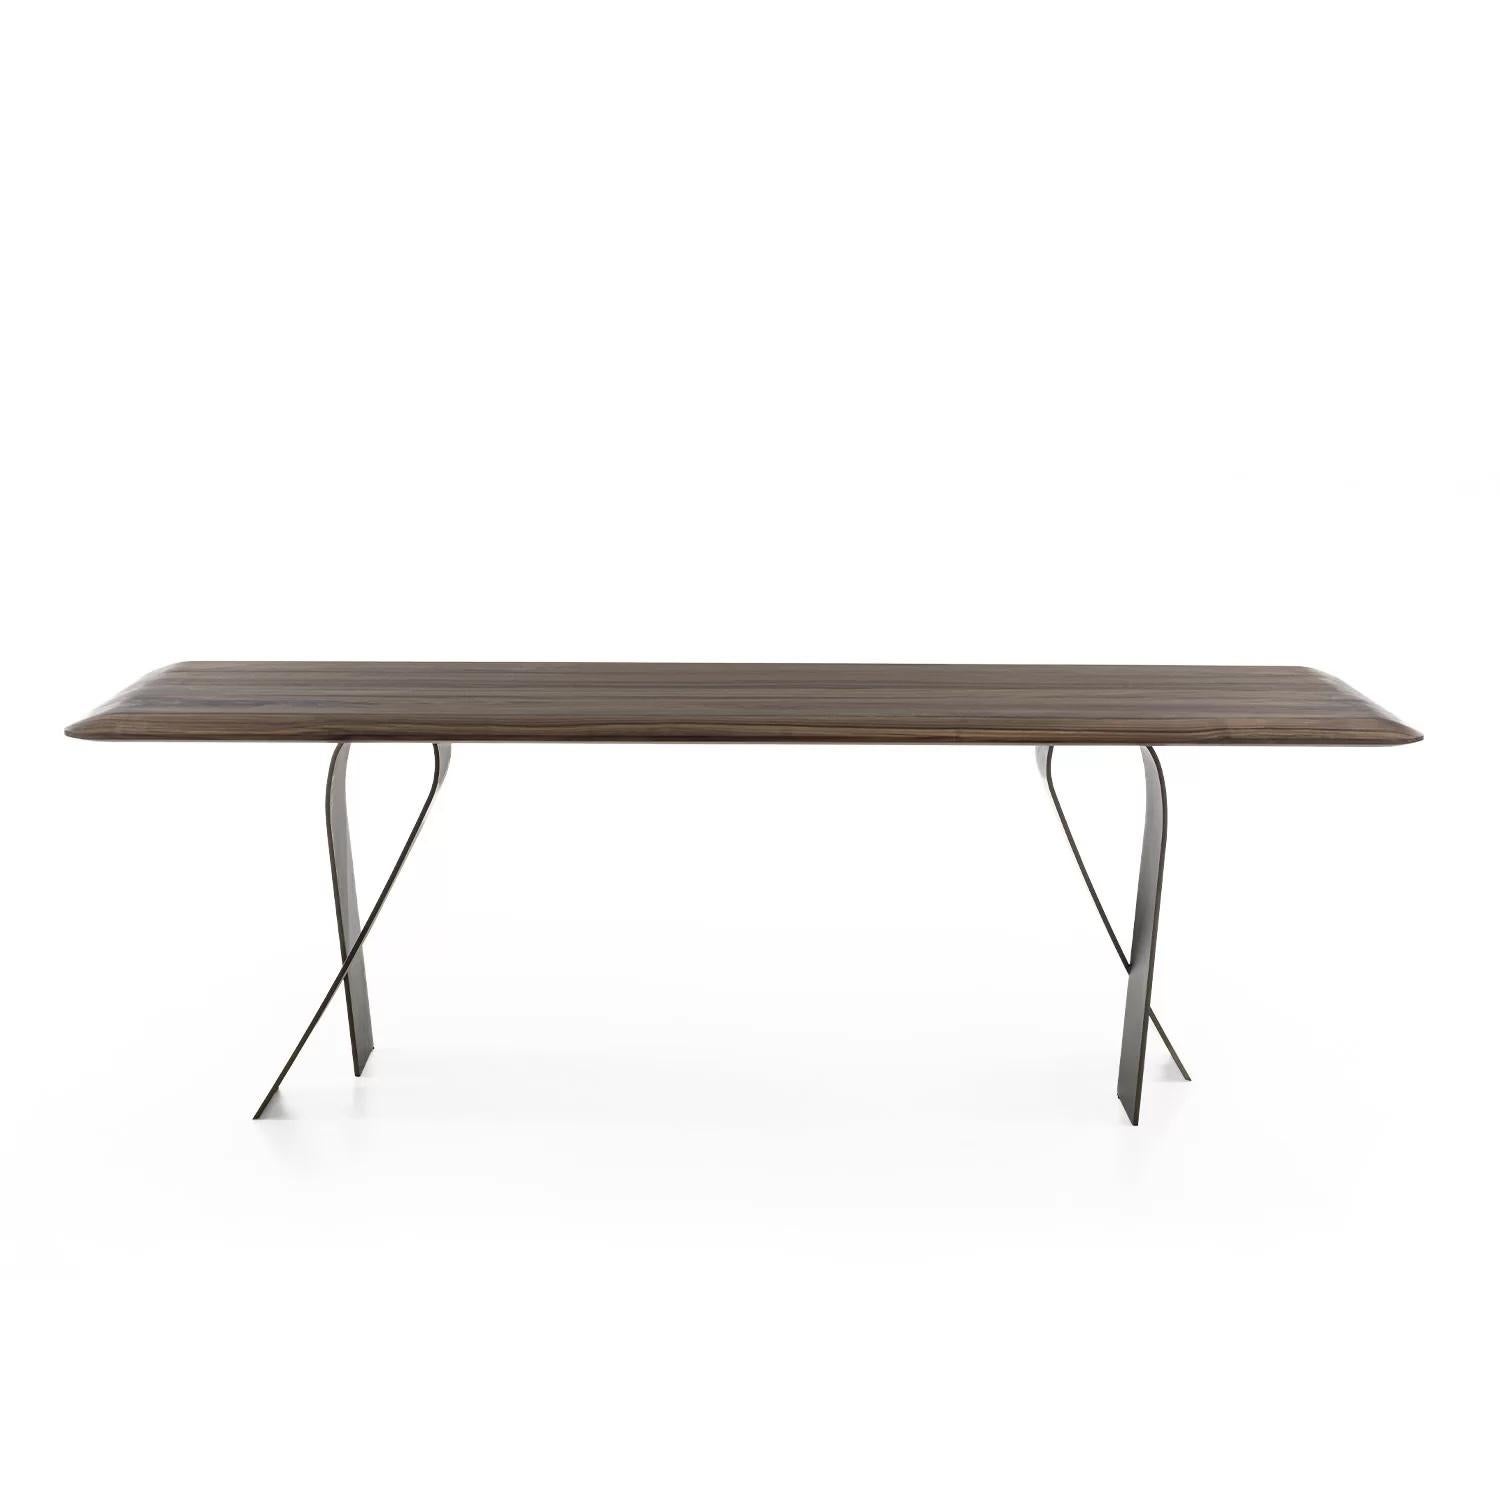 Table with a solid wood top with glued slats, characterized by a thin thickness thanks to the bevelled and rounded edges, which give it a light and sinuous design, and paired with winding iron legs evoking the flexibility of a ribbon.

Variety of